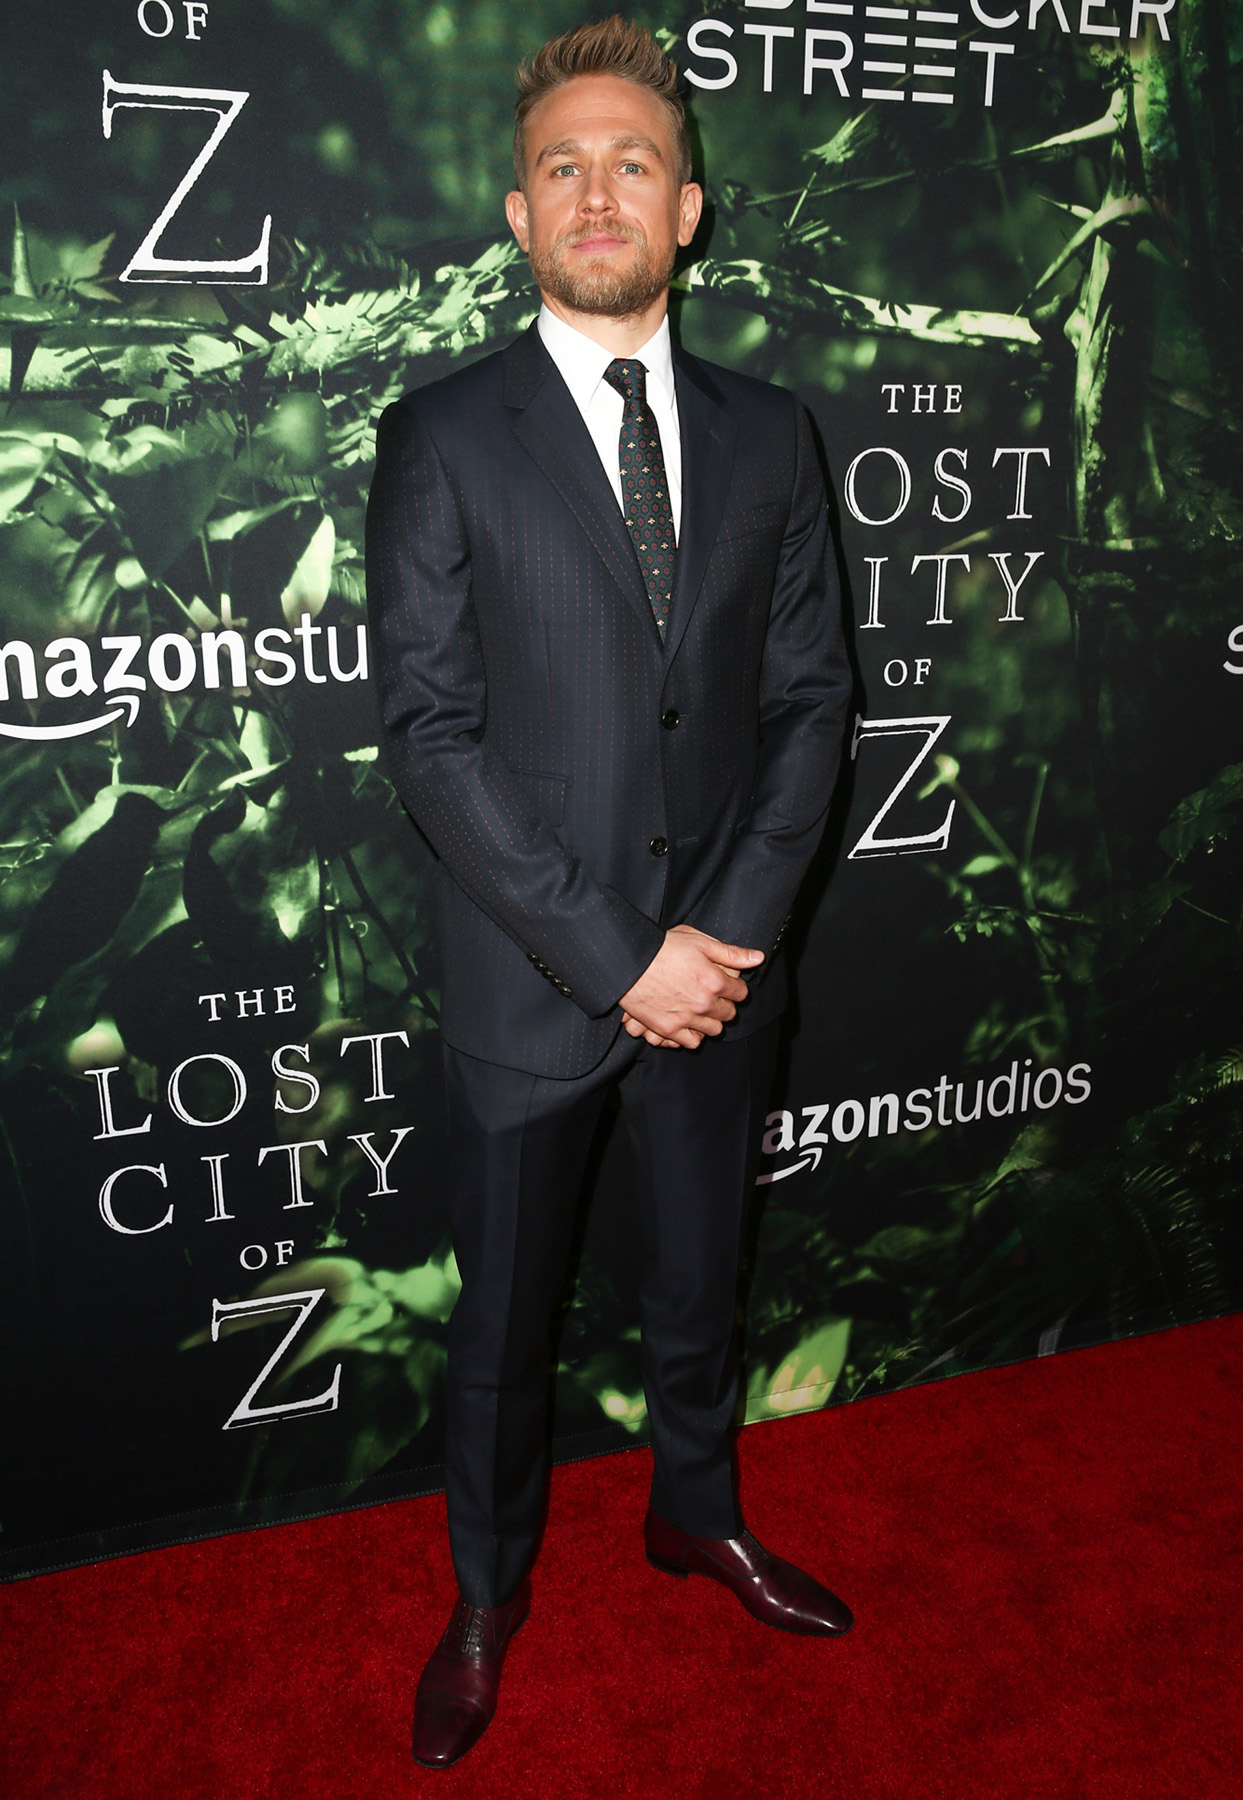 Premiere Of Amazon Studios' "The Lost City Of Z" - Arrivals